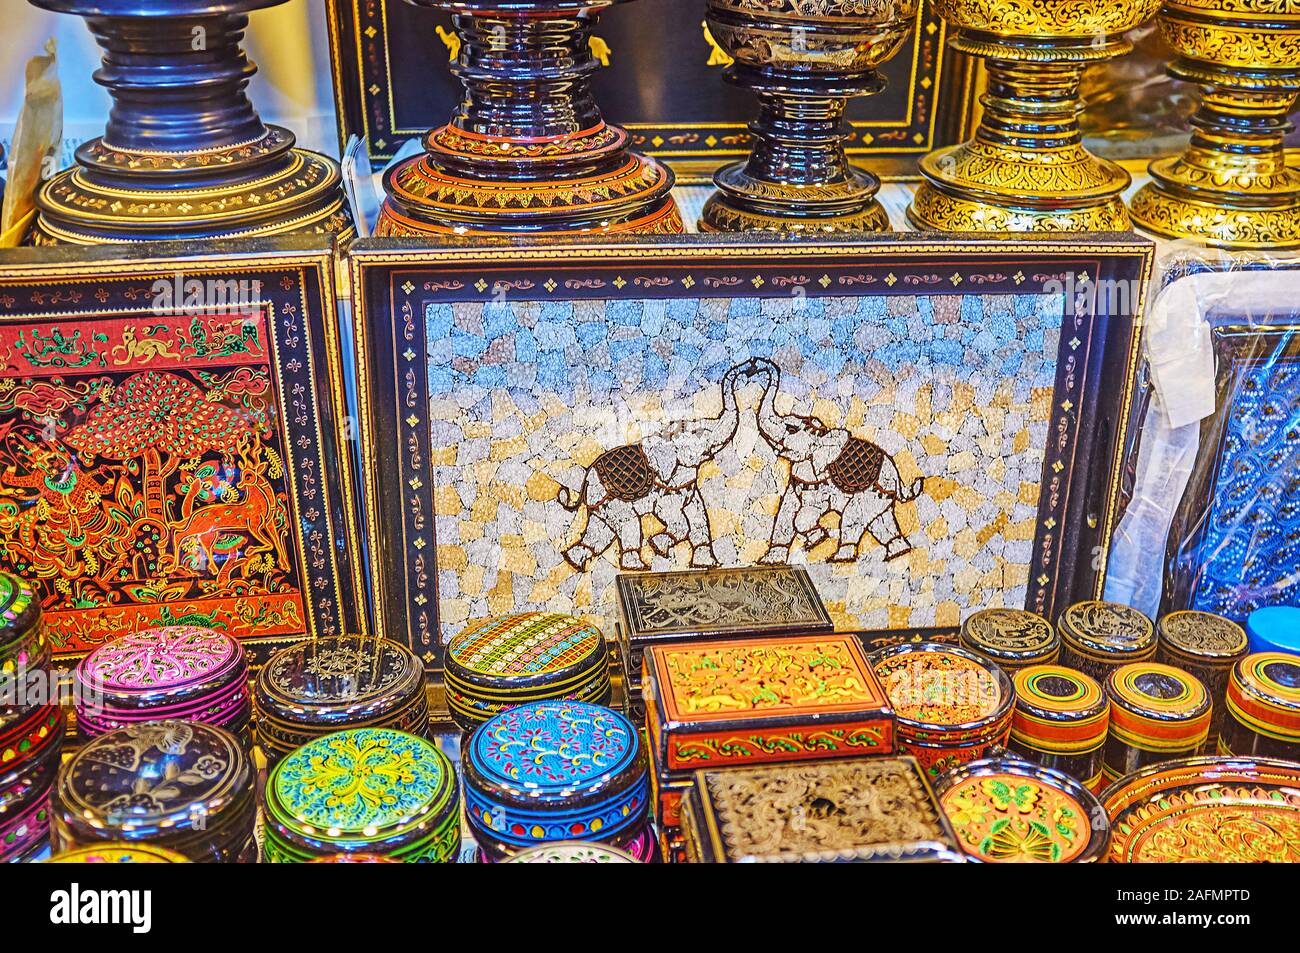 YANGON, MYANMAR - FEBRUARY 17, 2018: The famous Burmese lacquerware souvenirs in Bogyoke Aung San Market - trays and caskets with fine colorful patter Stock Photo